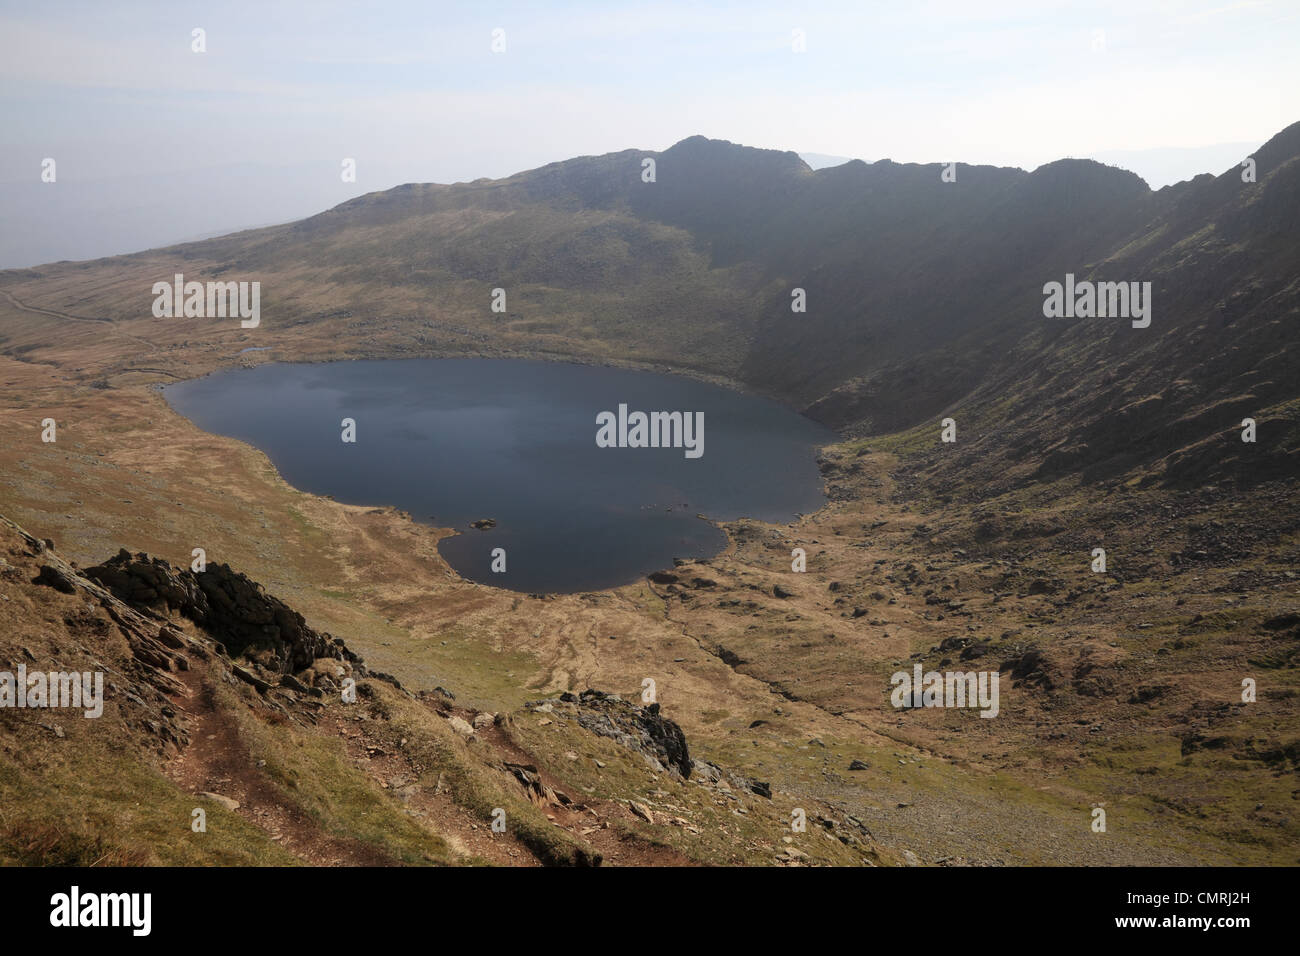 View of Red Tarn and Striding Edge from Swirral Edge, Helvellyn, Cumbria, NW England, UK Stock Photo